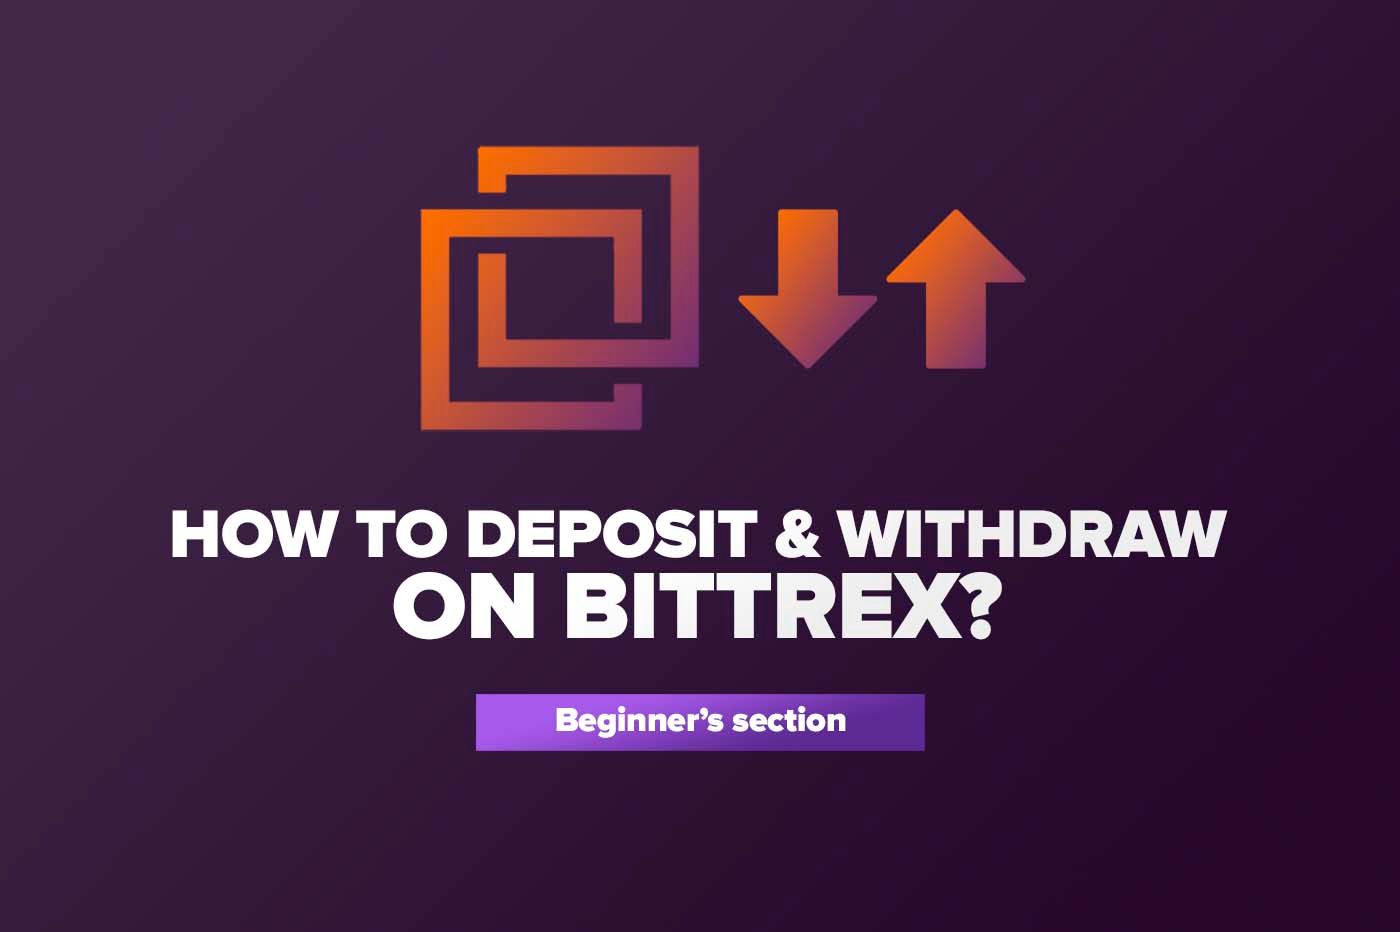 How to Deposit & Withdraw on Bittrex?